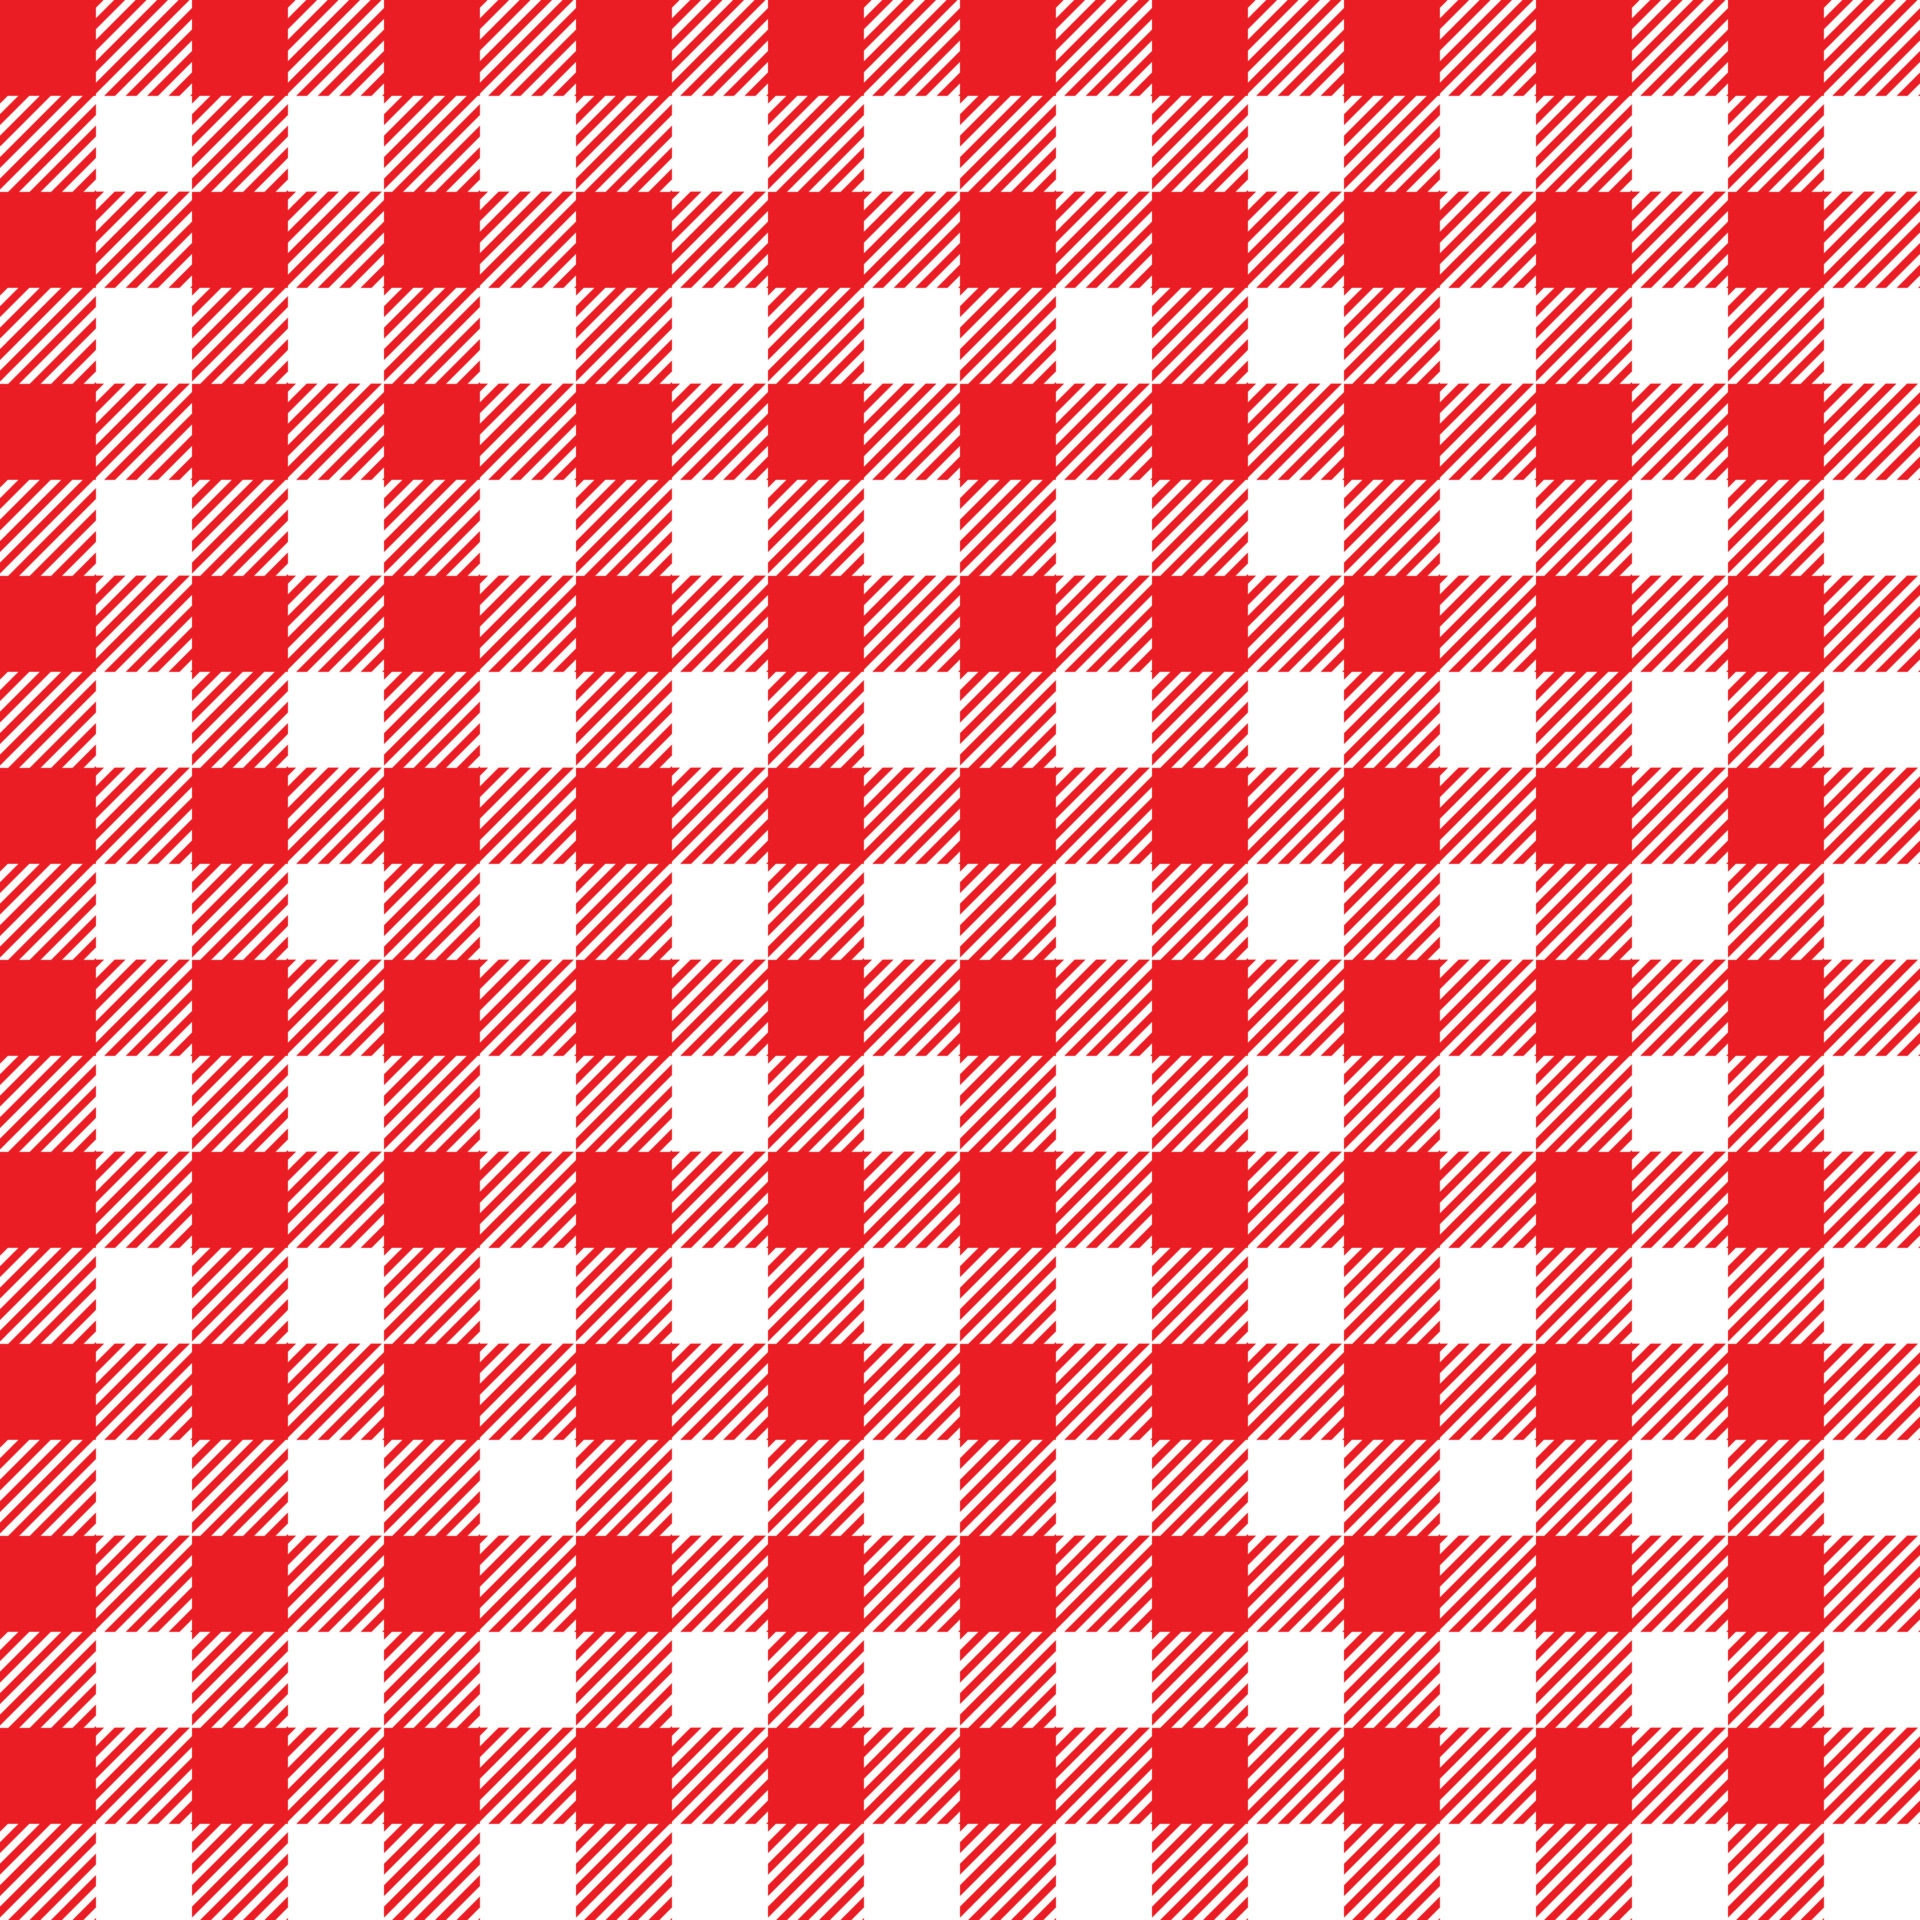 1920x1920 Red and white checkered for picnic blanket or seamless geometric textile or  illustration. 7746181 Vector Art